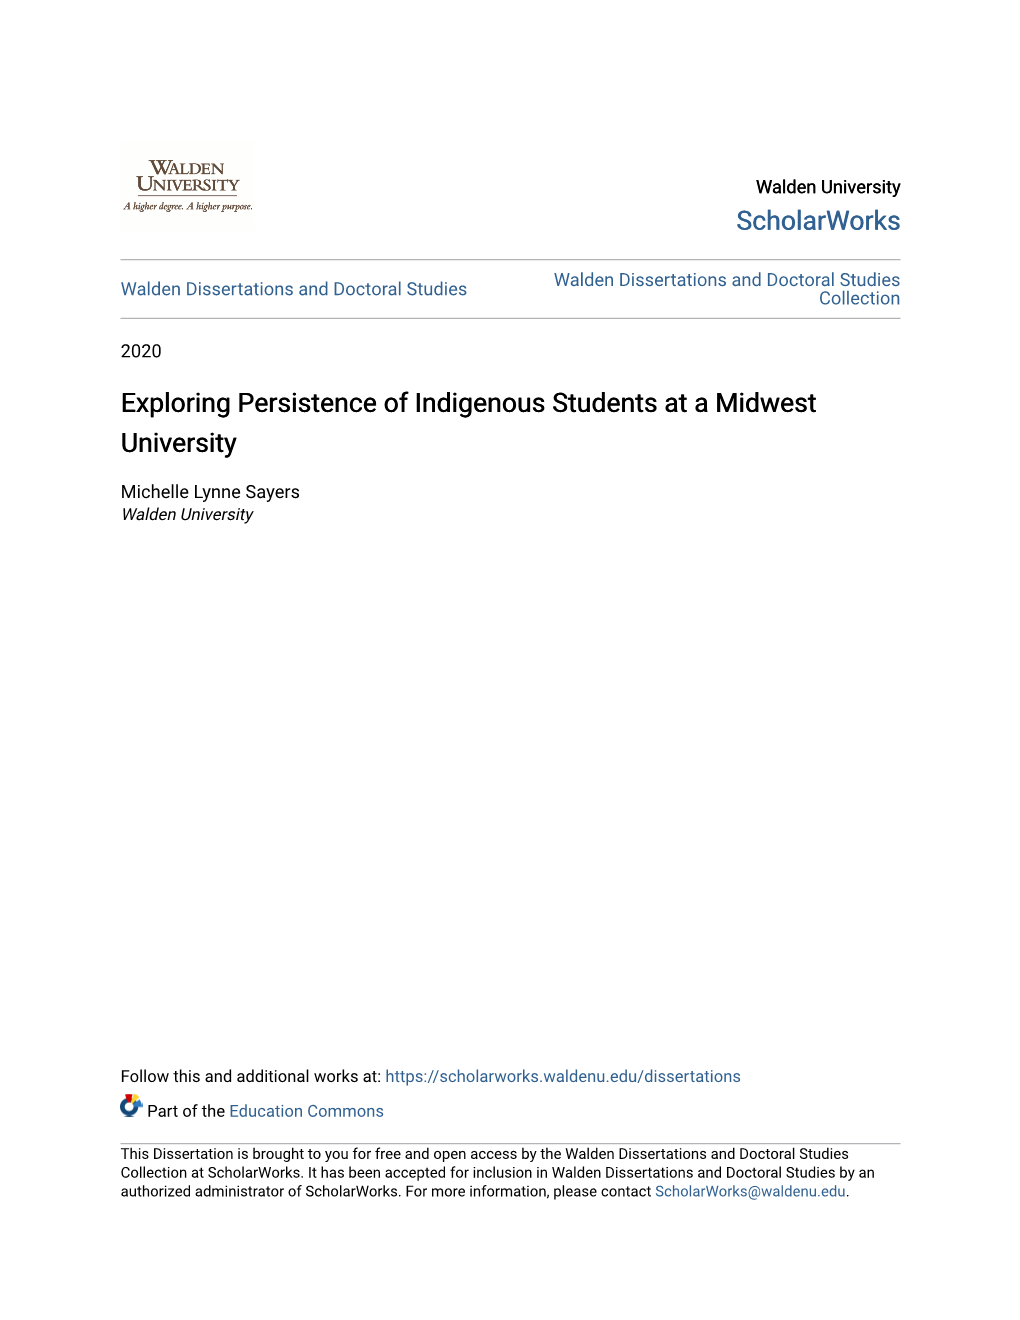 Exploring Persistence of Indigenous Students at a Midwest University